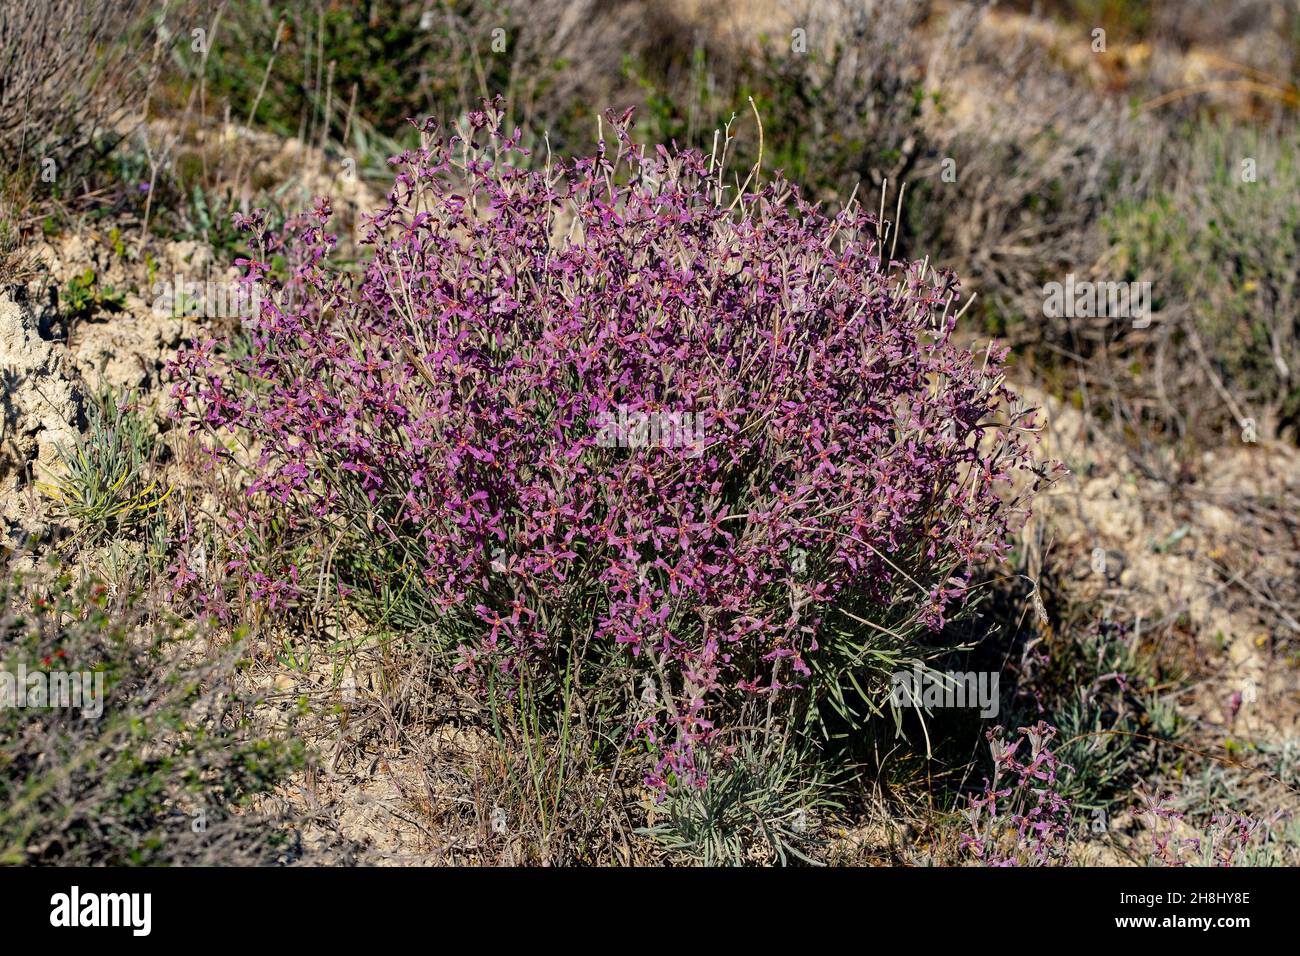 Matthiola fruticulosa - The field wallflower is a perennial herb that grows in dry, rocky places Stock Photo